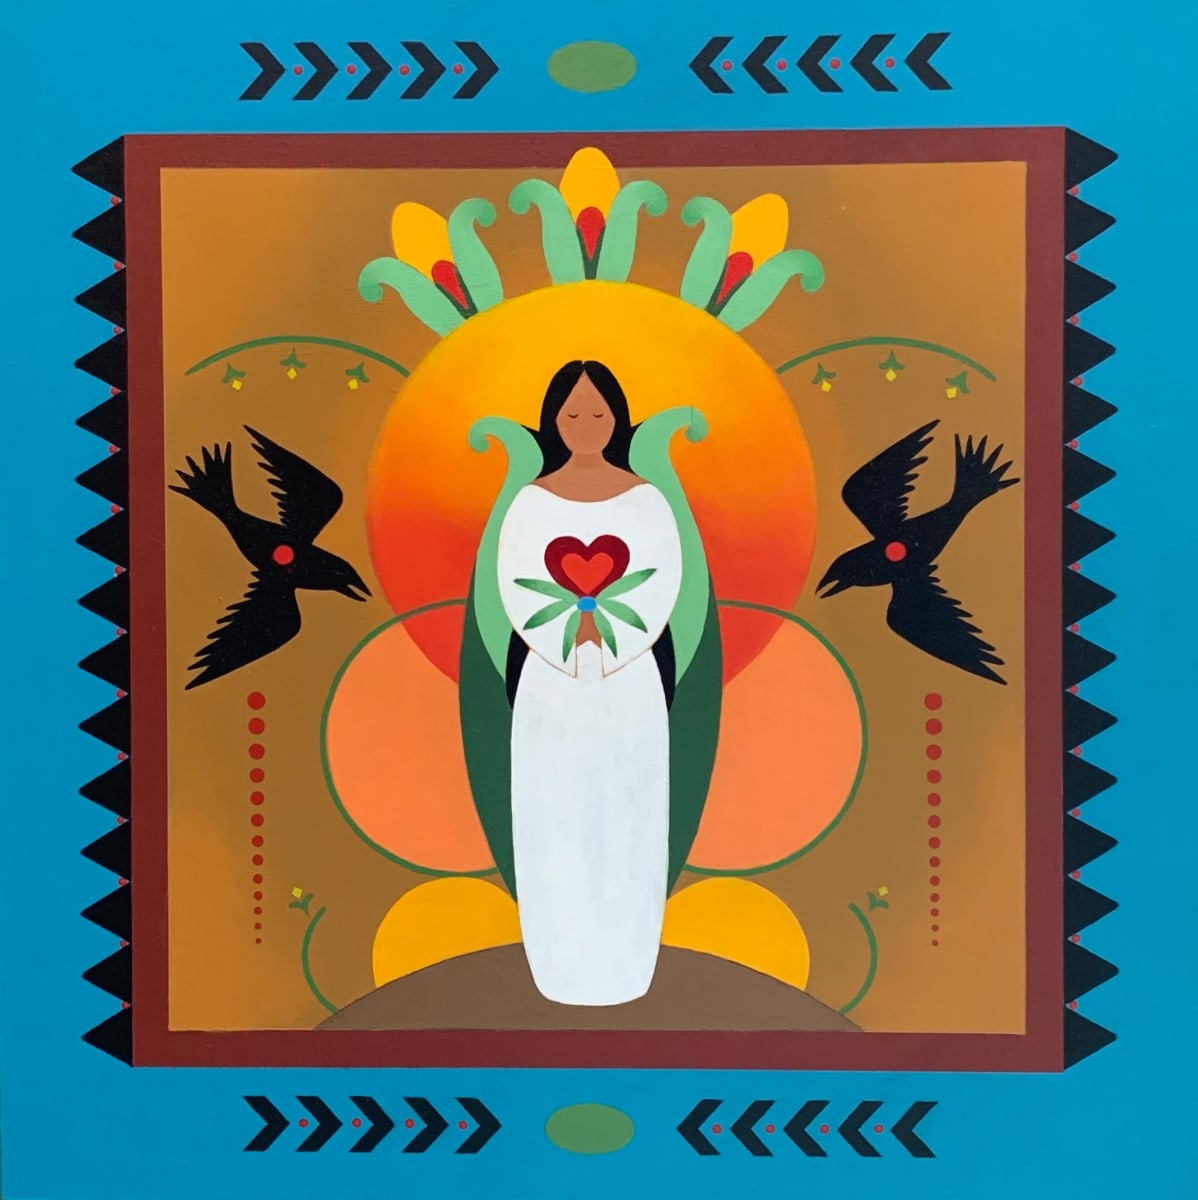 Legend of the Corn Woman by Karen Clarkson  Image: Many native people have legends and myths regarding the gift of corn. This is the Choctaw Legend of the Corn Woman